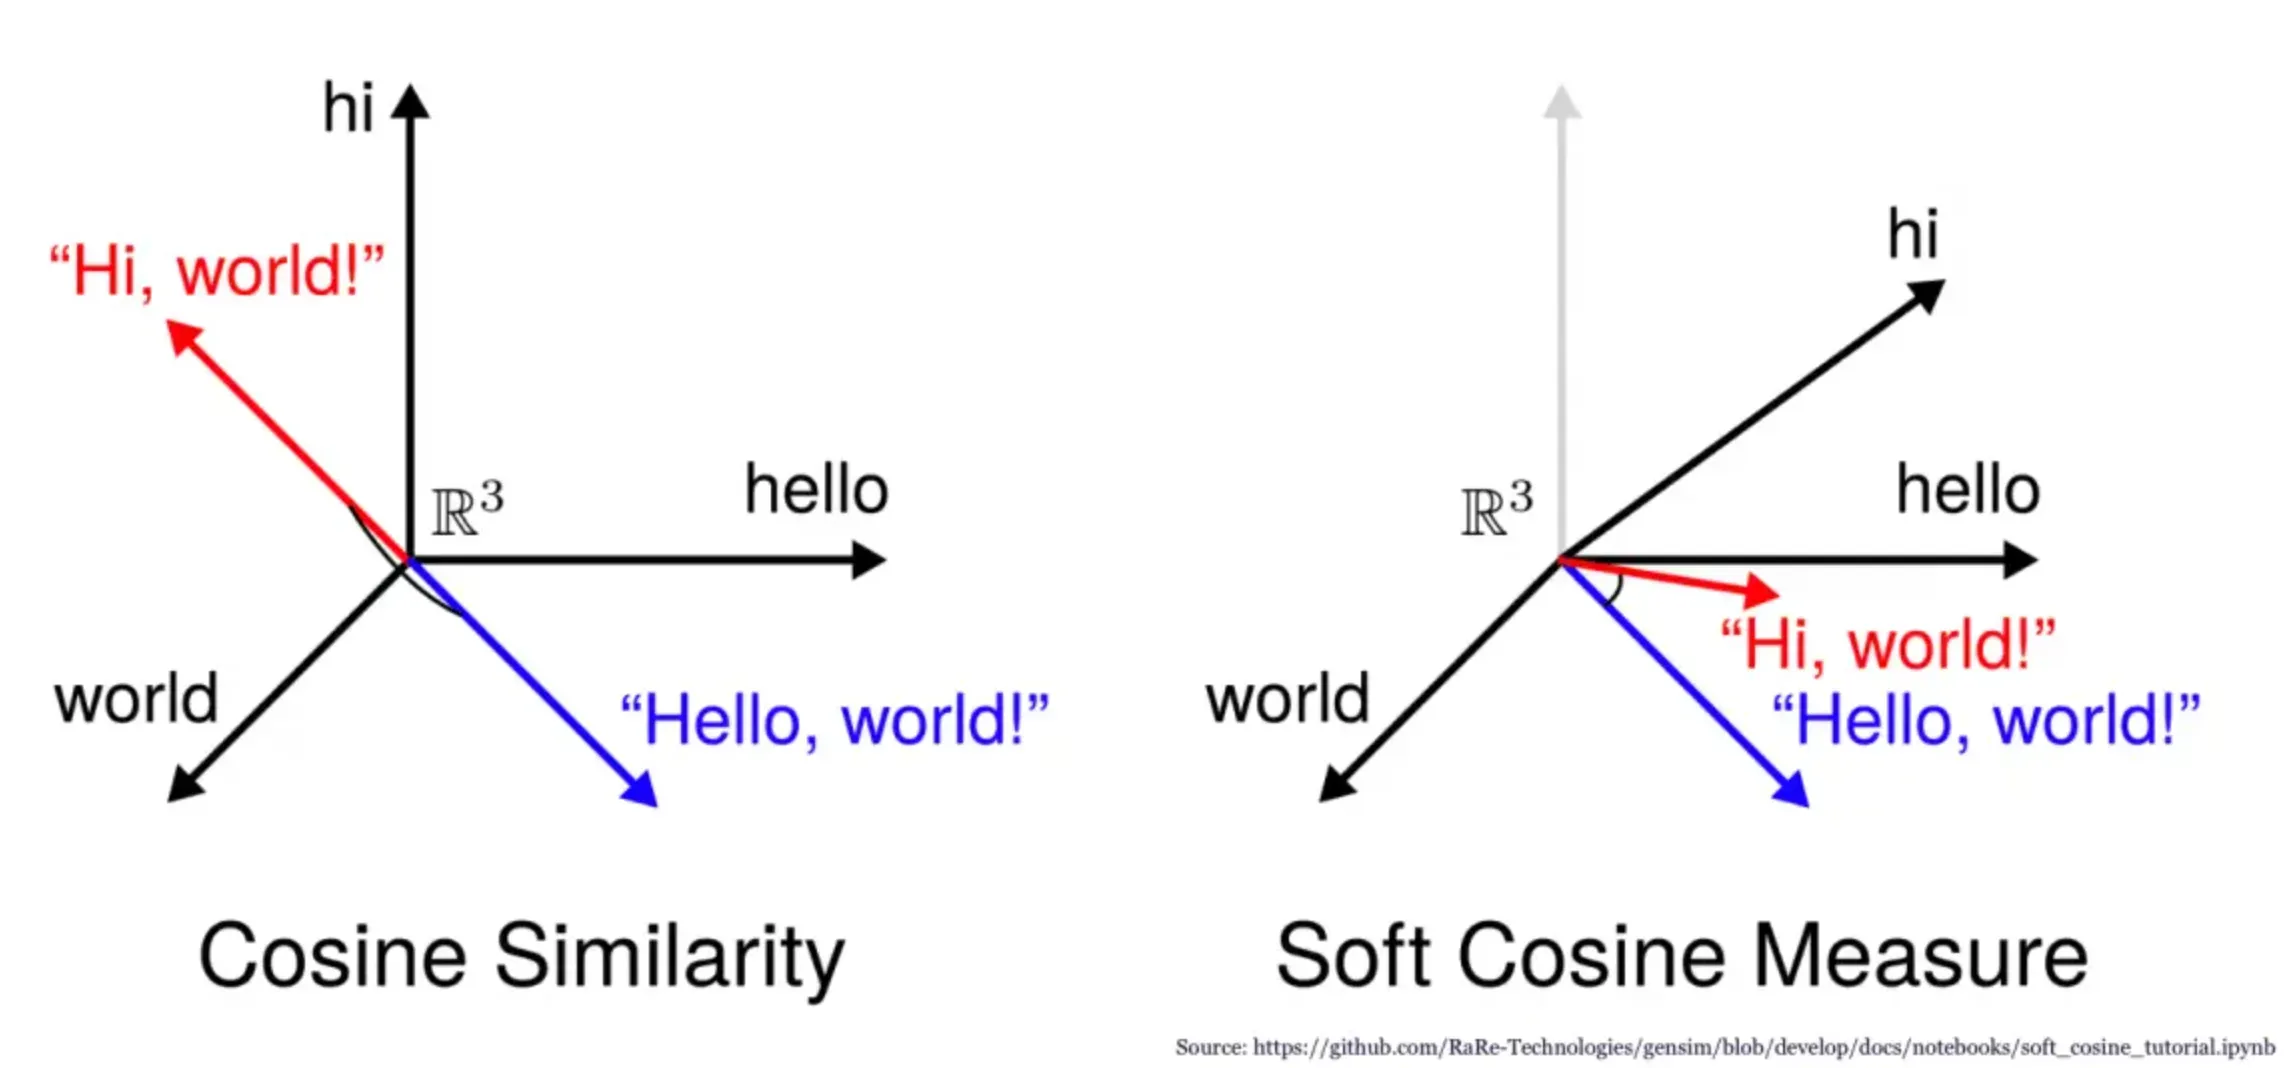 When to Use Cosine Similarity?